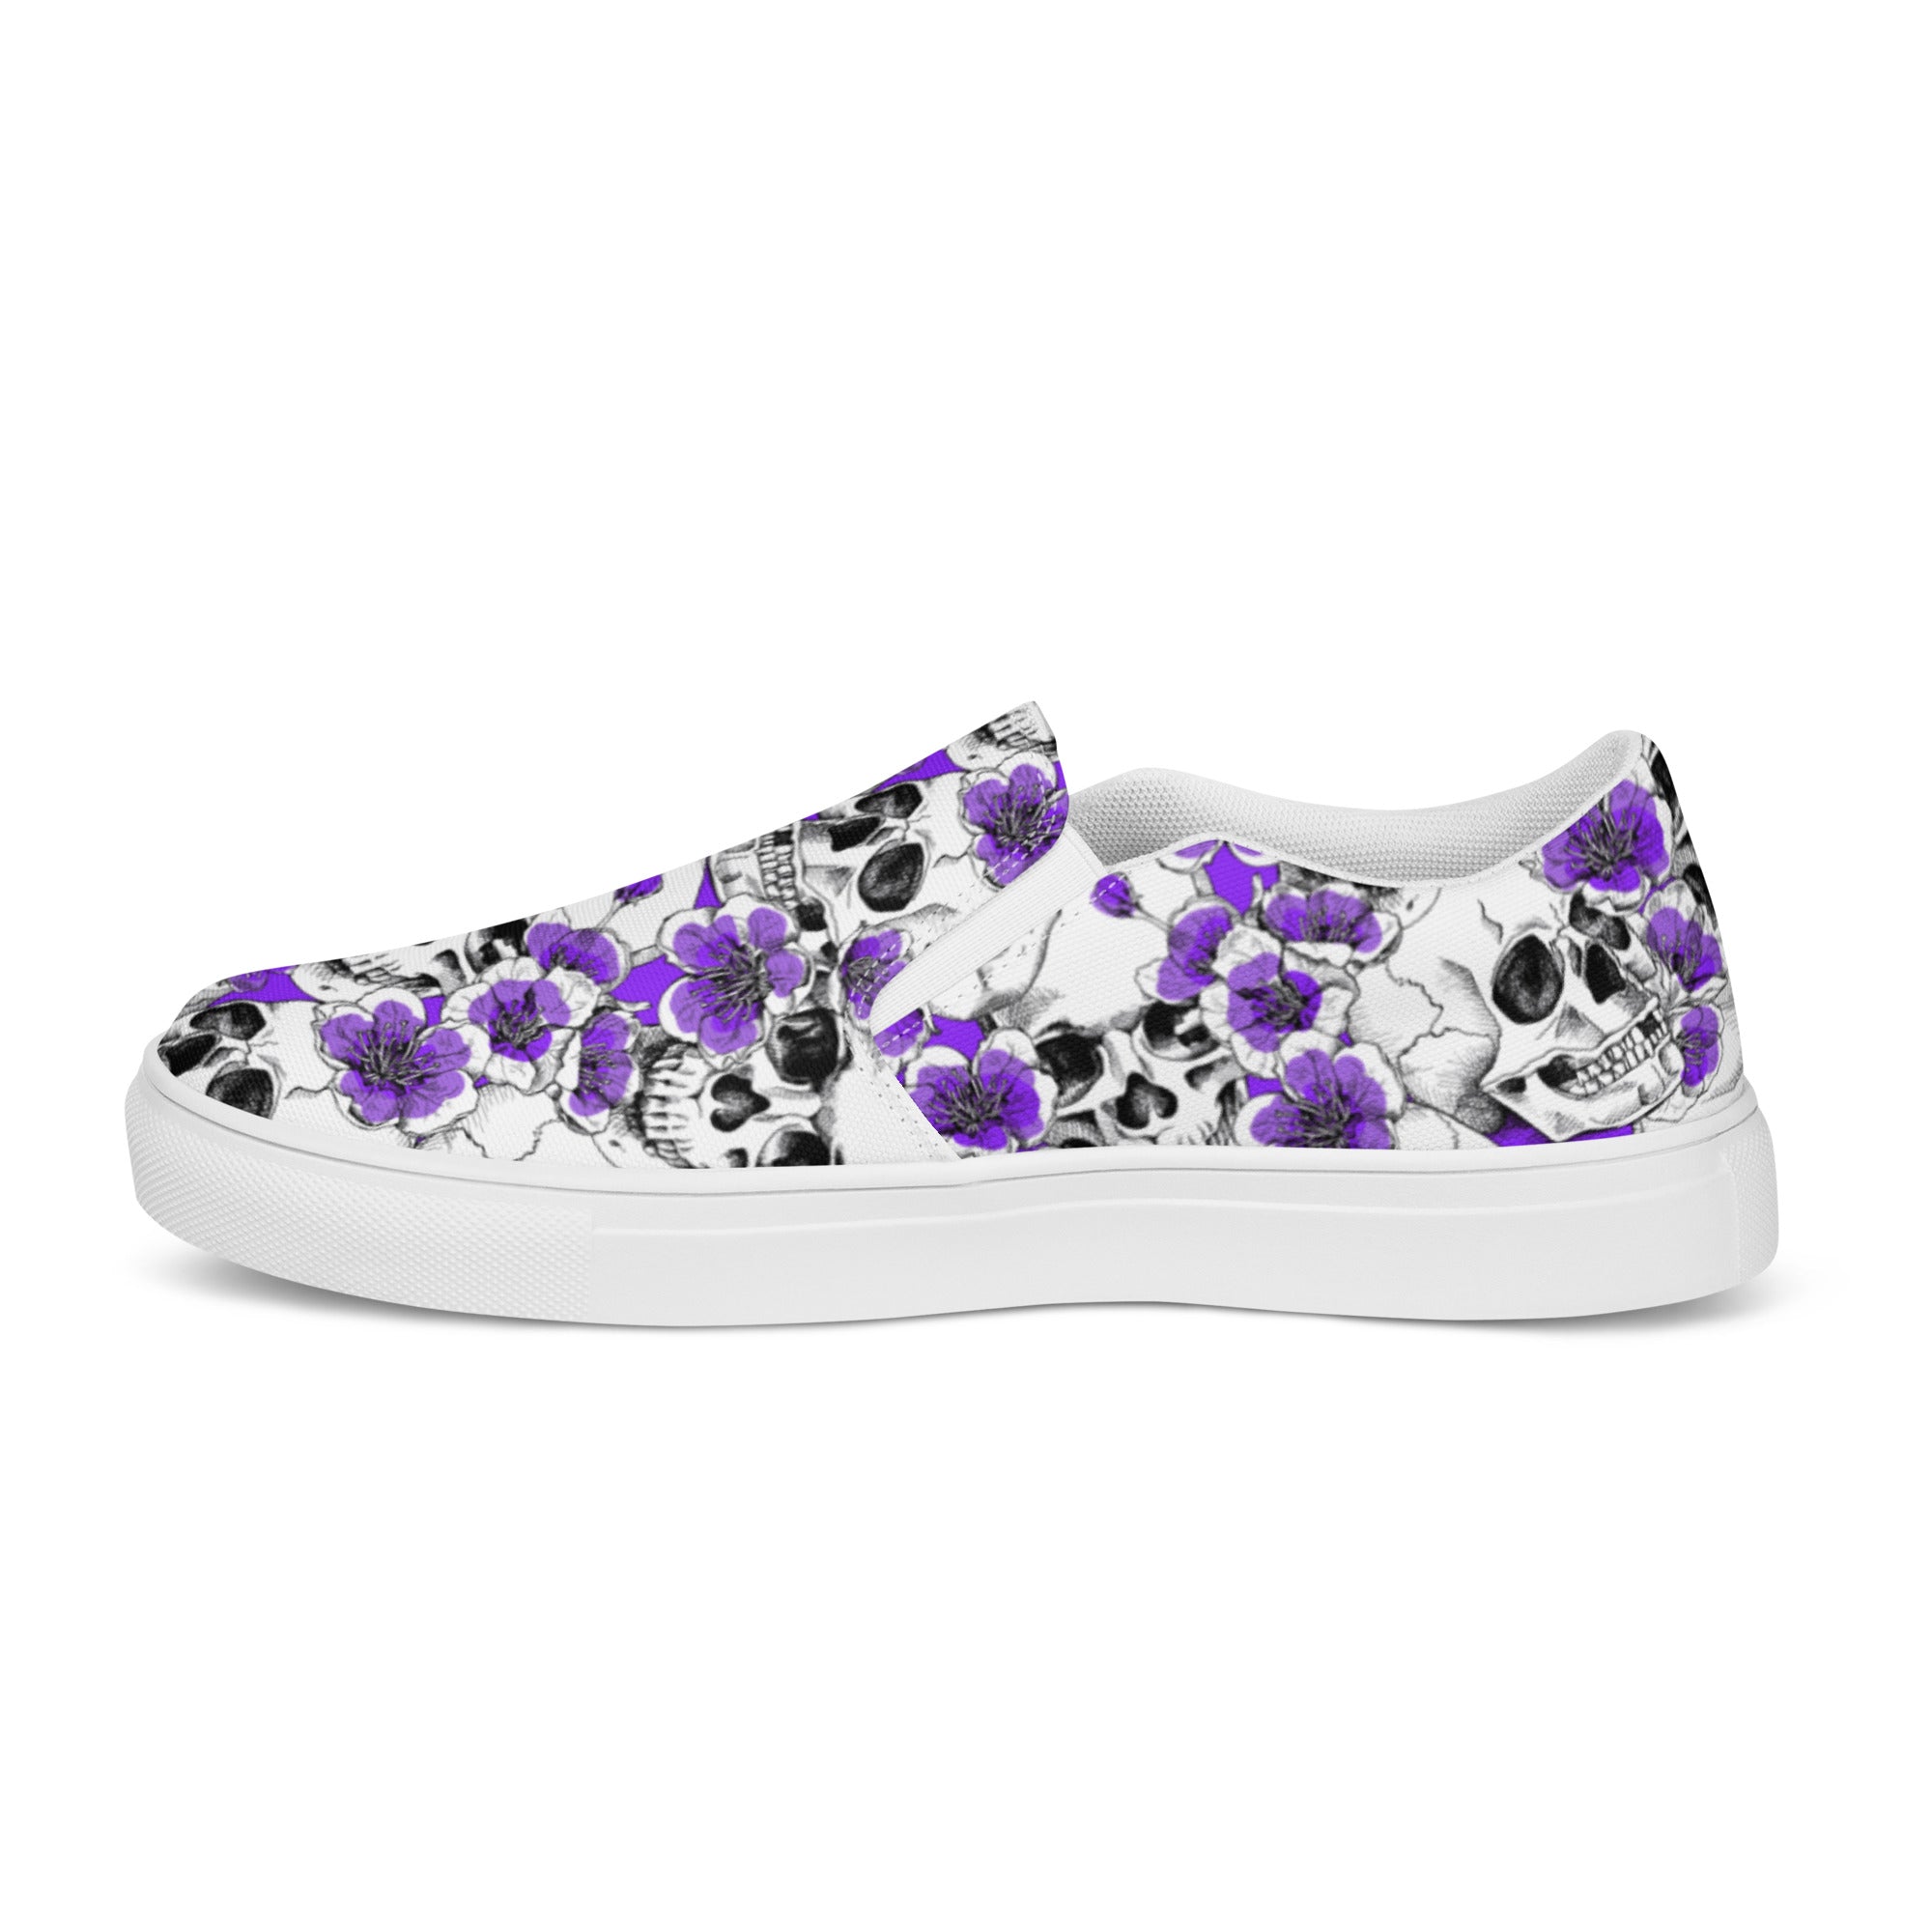 Skulls and Purple Blossoms Women’s Slip-on Canvas Shoes